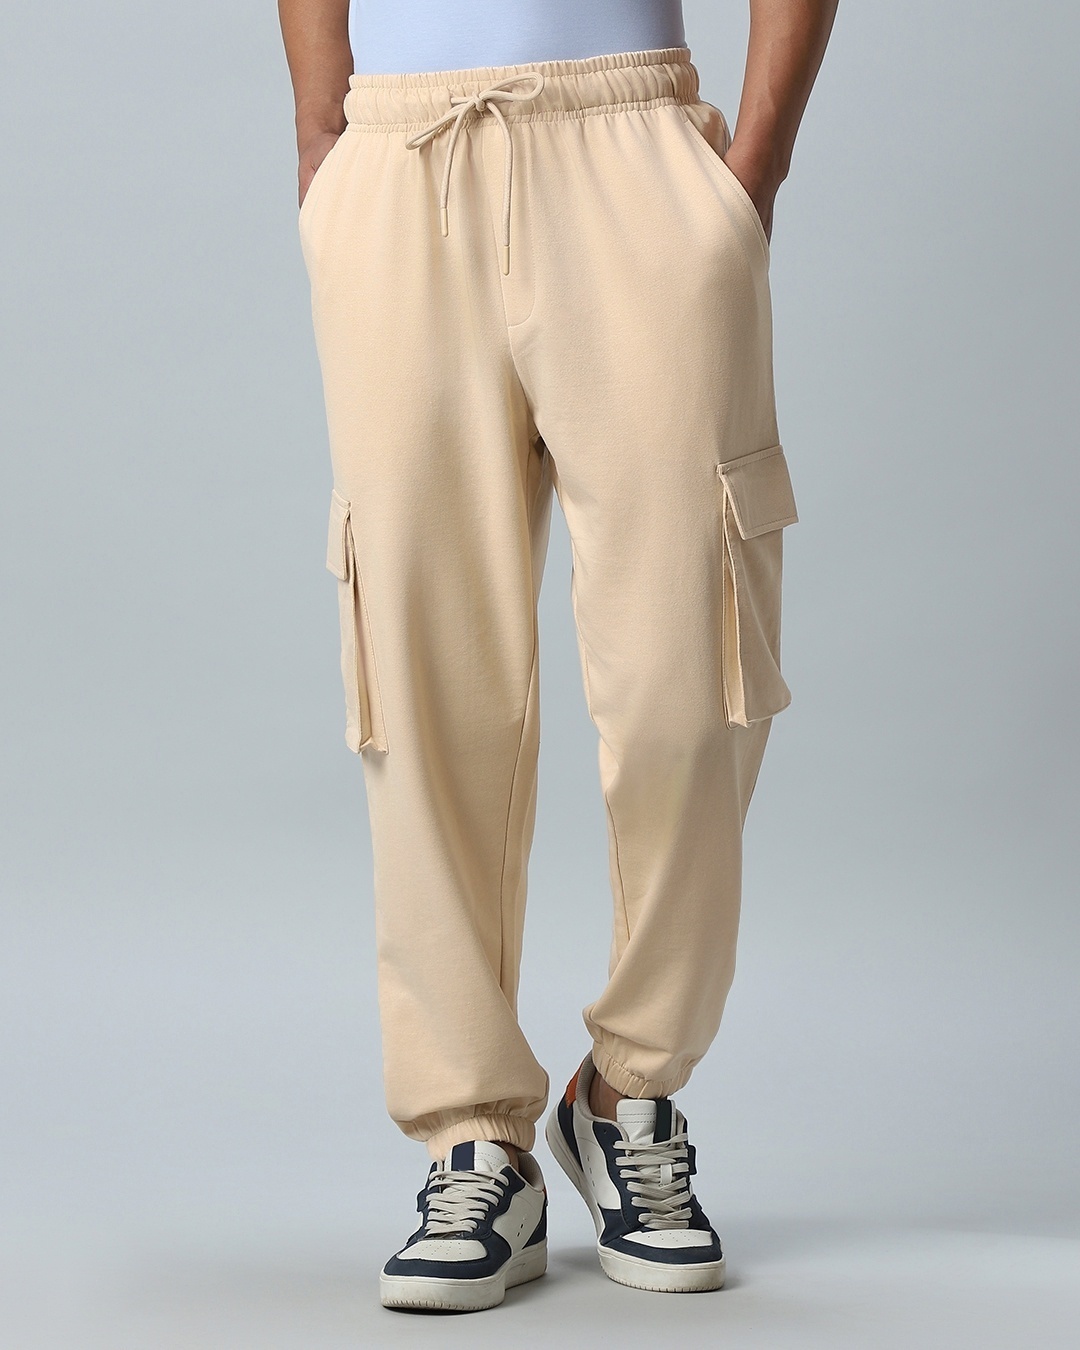 MODEL WEARING Different Types of Cargo Pants as joggers